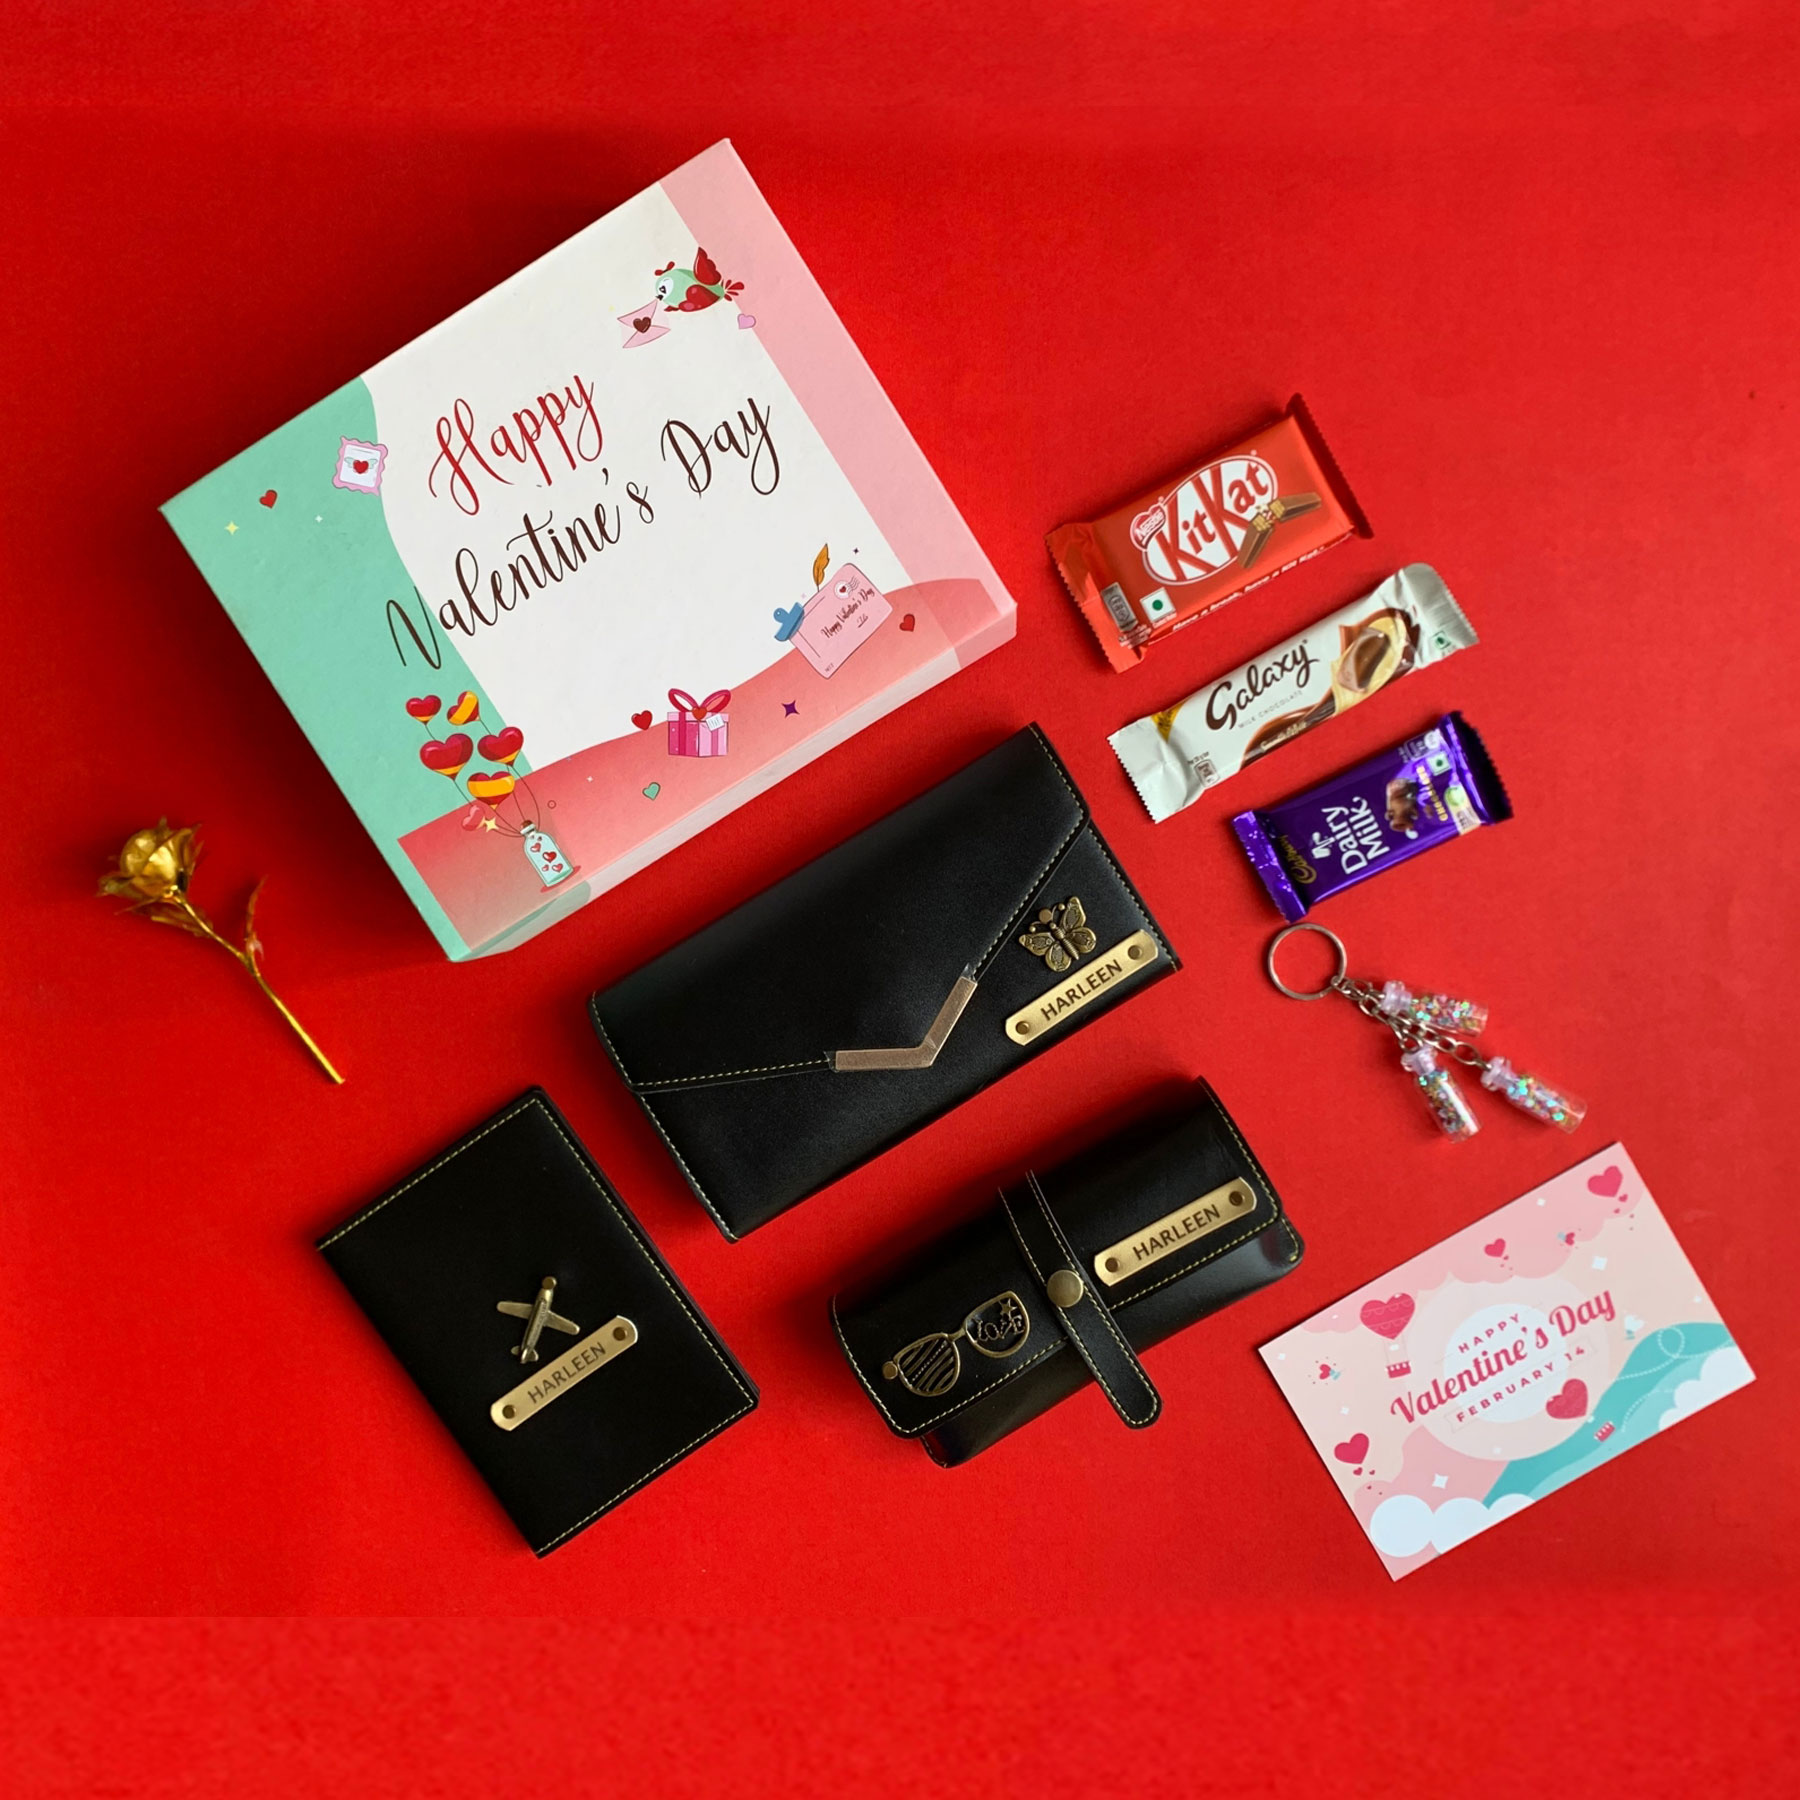 15 Valentine's Day Gifts Wife, Girlfriend Or For Her At Kohl's - Dear  Creatives